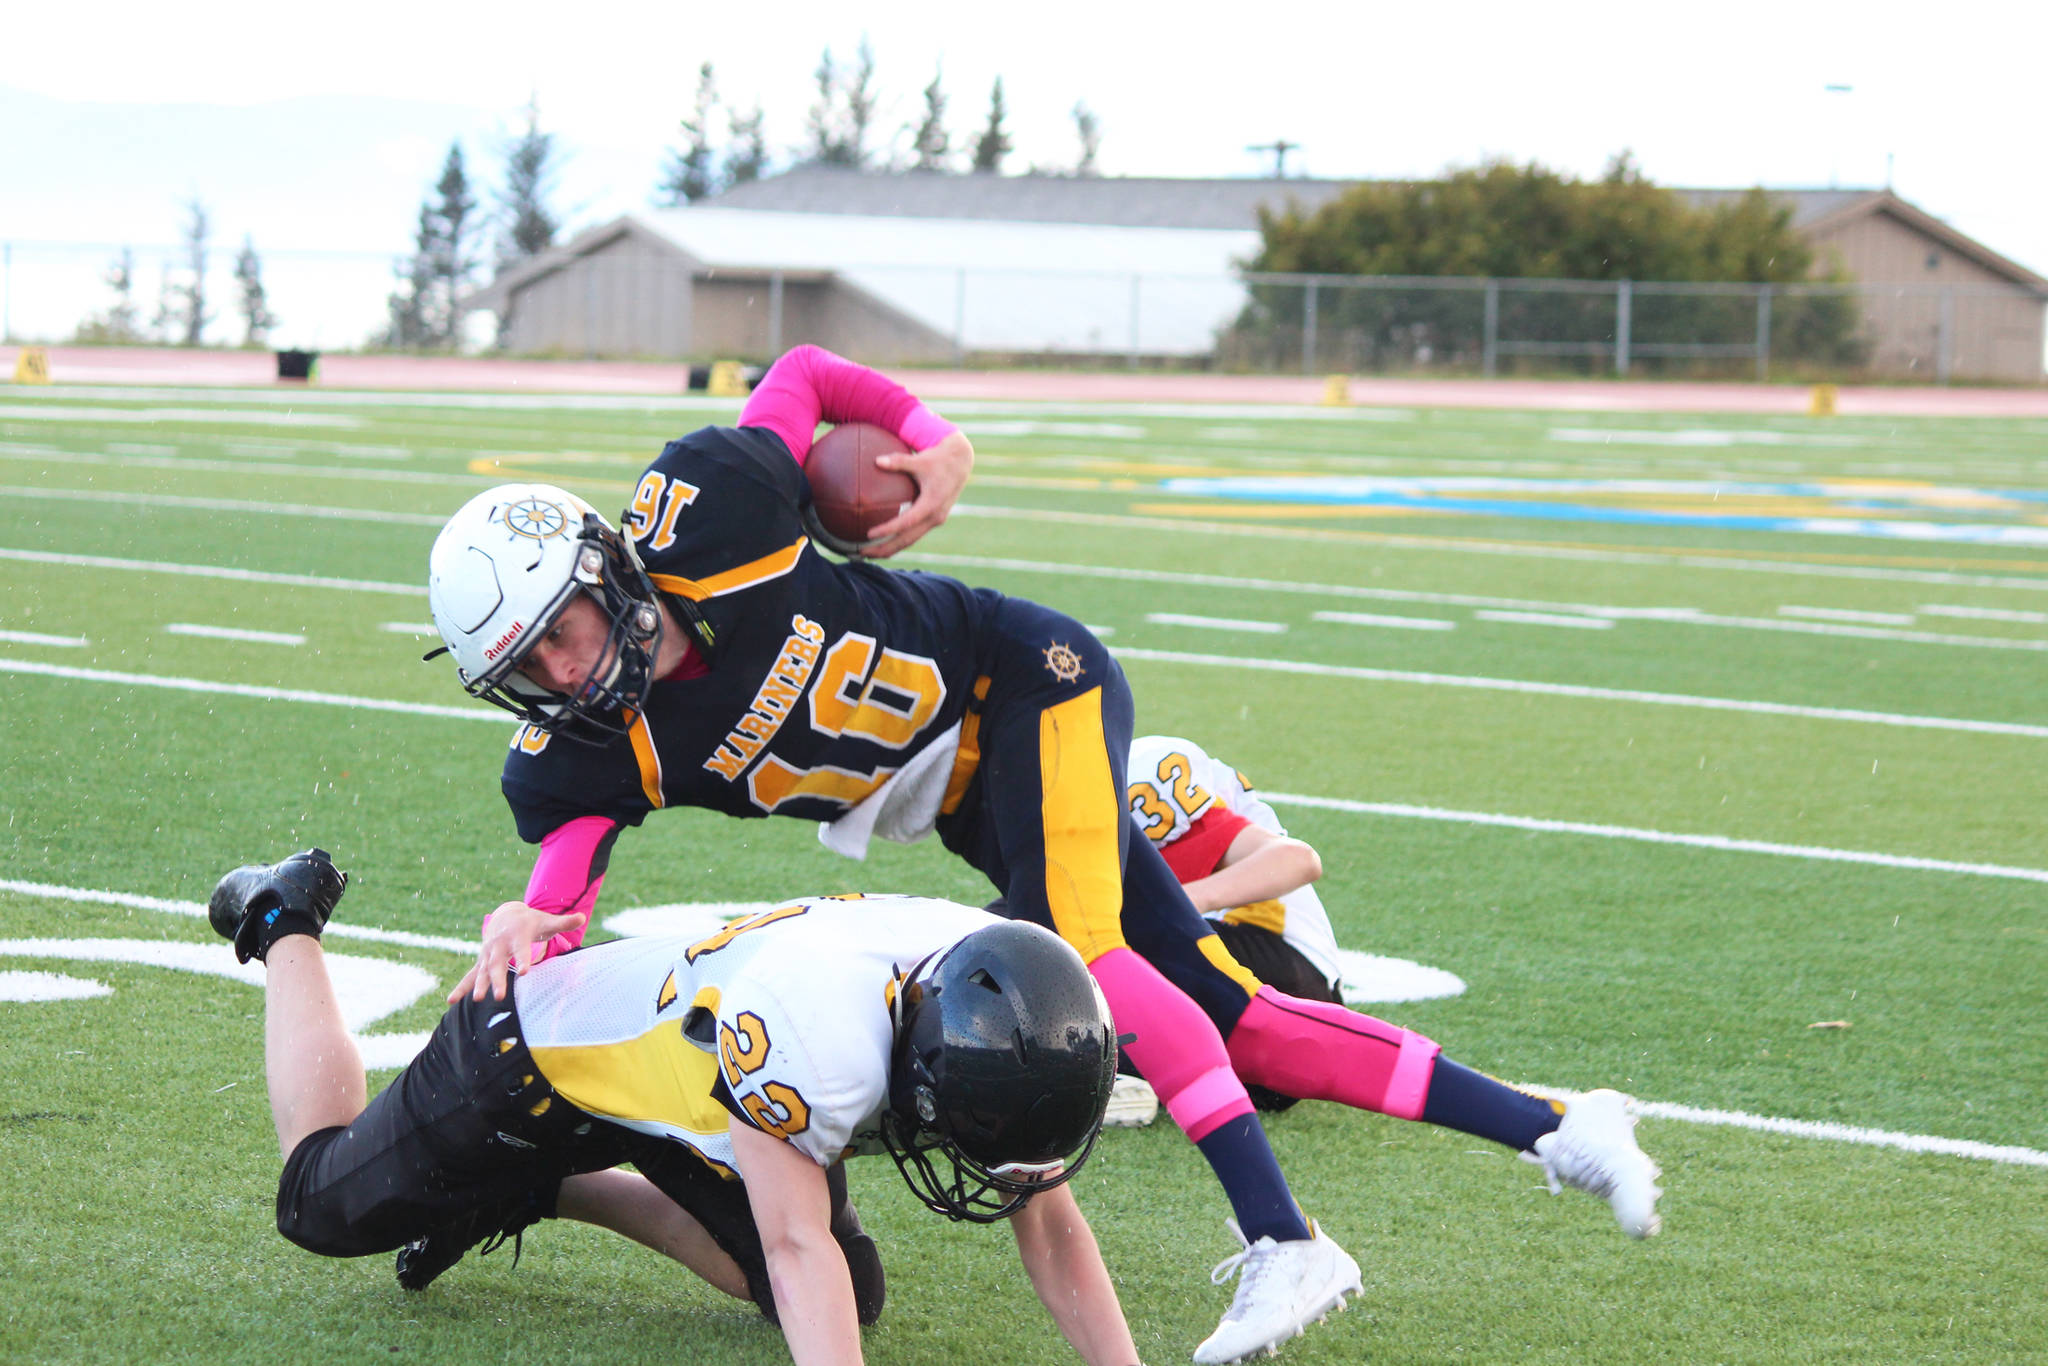 Homer senior Justin Sumption is taken down by Cougars sophomore Antonin Murachev (22) and freshman Markian Reutov (32) during their game Friday, Sept. 29, 2017 at the Mariner field in Homer, Alaska. The Mariners topped the Cougars 53-0. (Photo by Megan Pacer/Homer News)